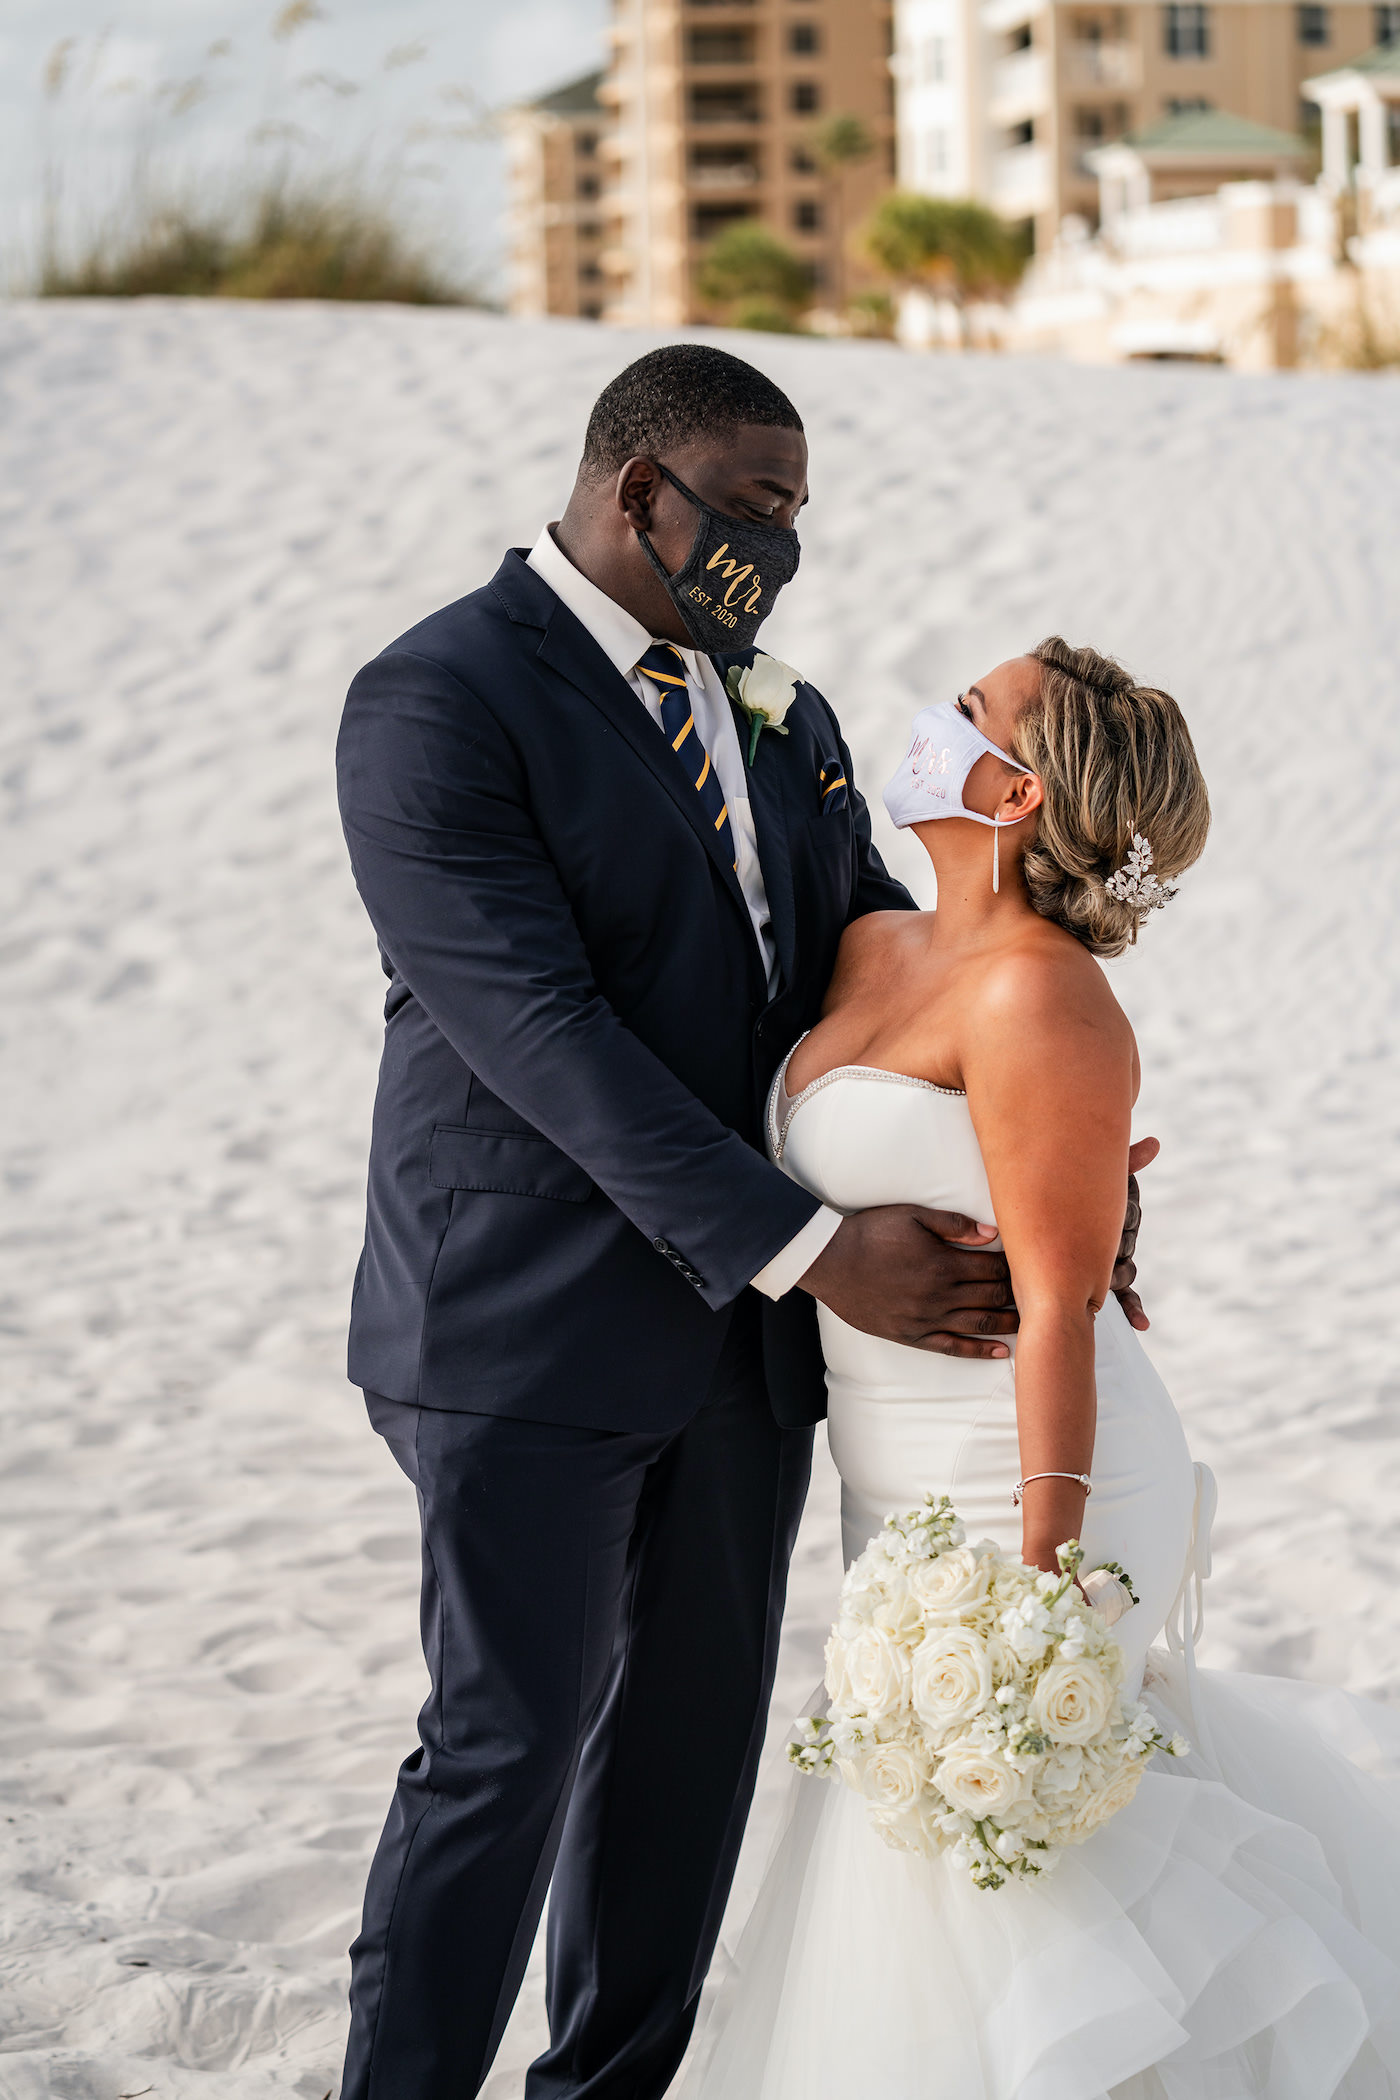 Destination Wedding During Pandemic. COVID Bride and Groom Beachfront Wedding Portraits Wearing Mr. and Mrs. Masks, Romantic Tropical Bride and Groom Just Married on the sand of Clearwater Beach, Bride Wearing Sophisticated Fit and Flare Strapless Wedding Dress | Florida Gulf of Mexico Hotel and Wedding Venue Hilton Clearwater Beach